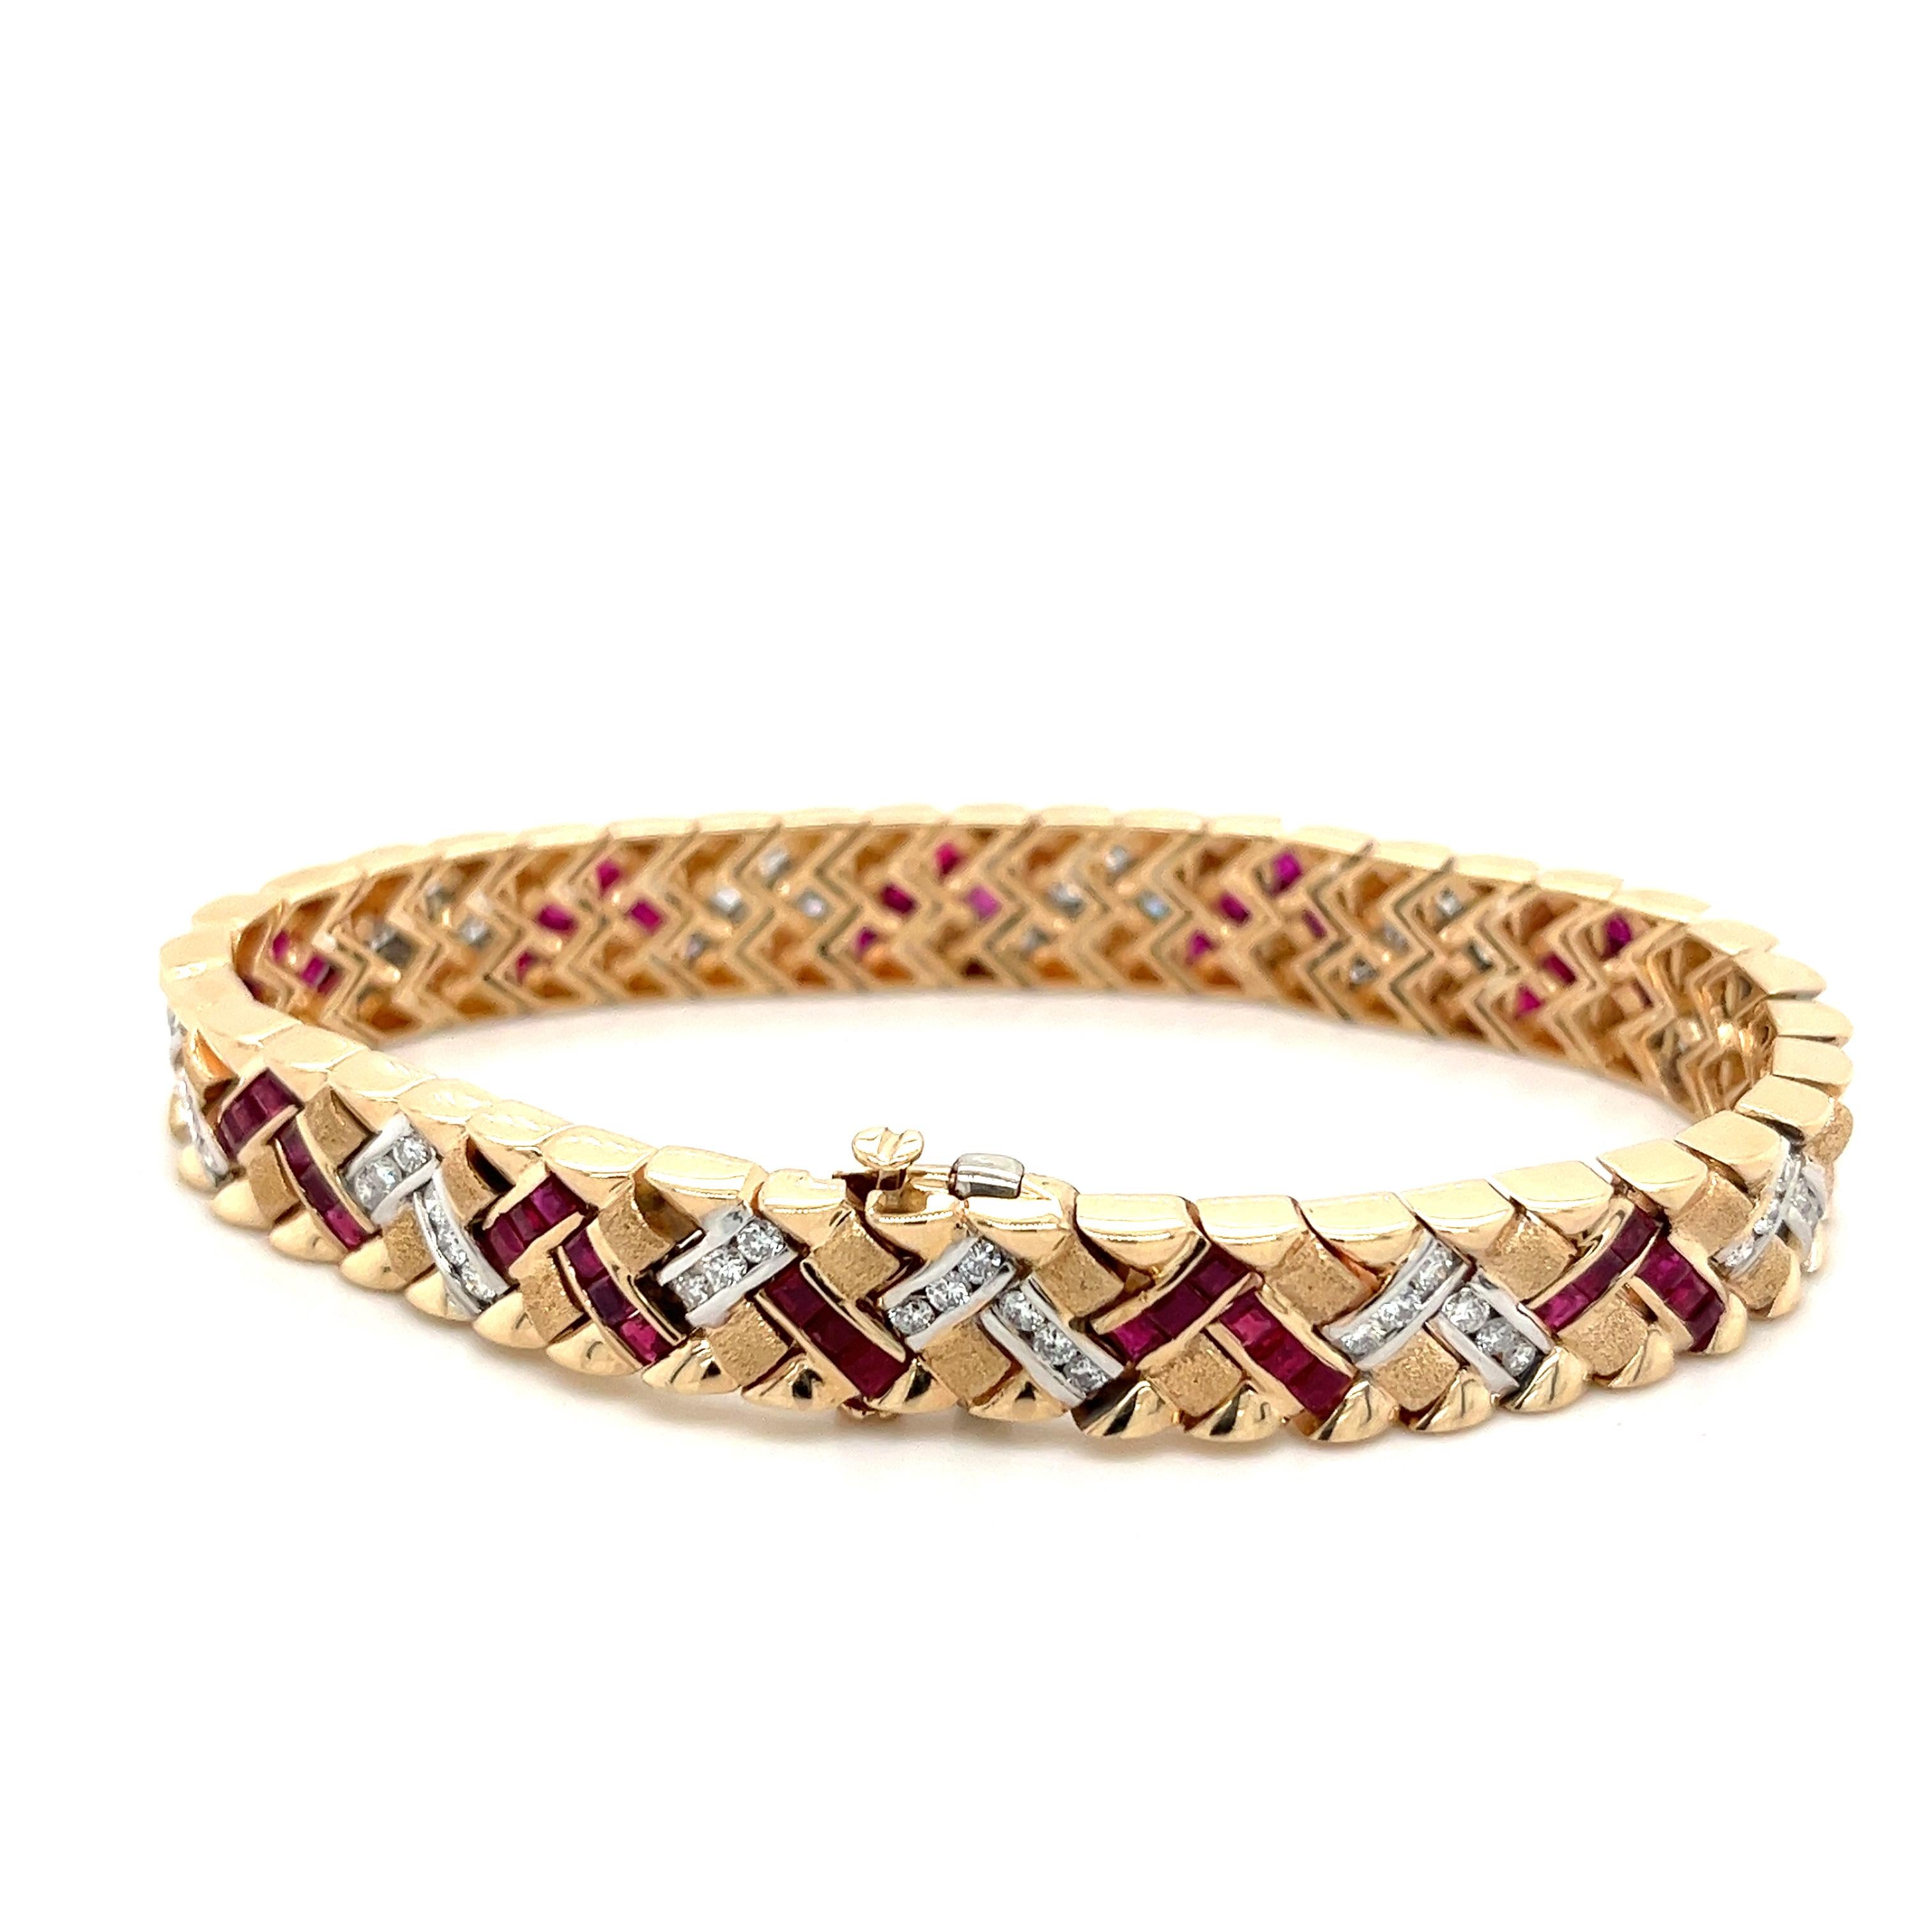 Art Deco-inspired 14k solid yellow gold bracelet set with 126 natural Rubies and Diamonds. 

This bracelet is a vintage masterpiece—a one-of-a-kind piece with the quintessential art deco symmetrical pattern. Handmade with a gorgeous mix of a